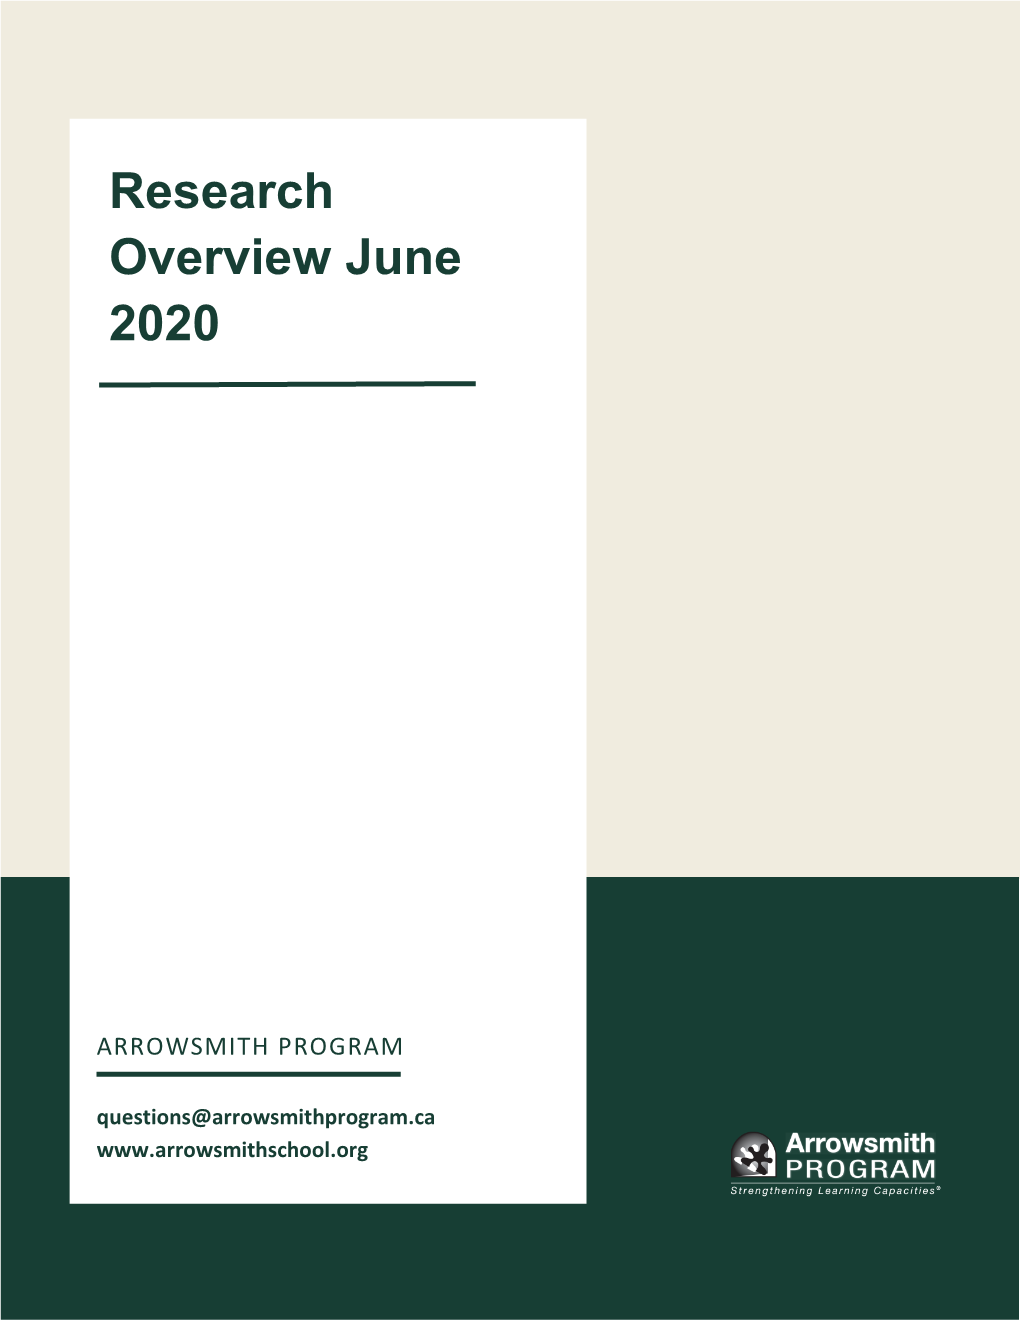 Research Overview June 2020